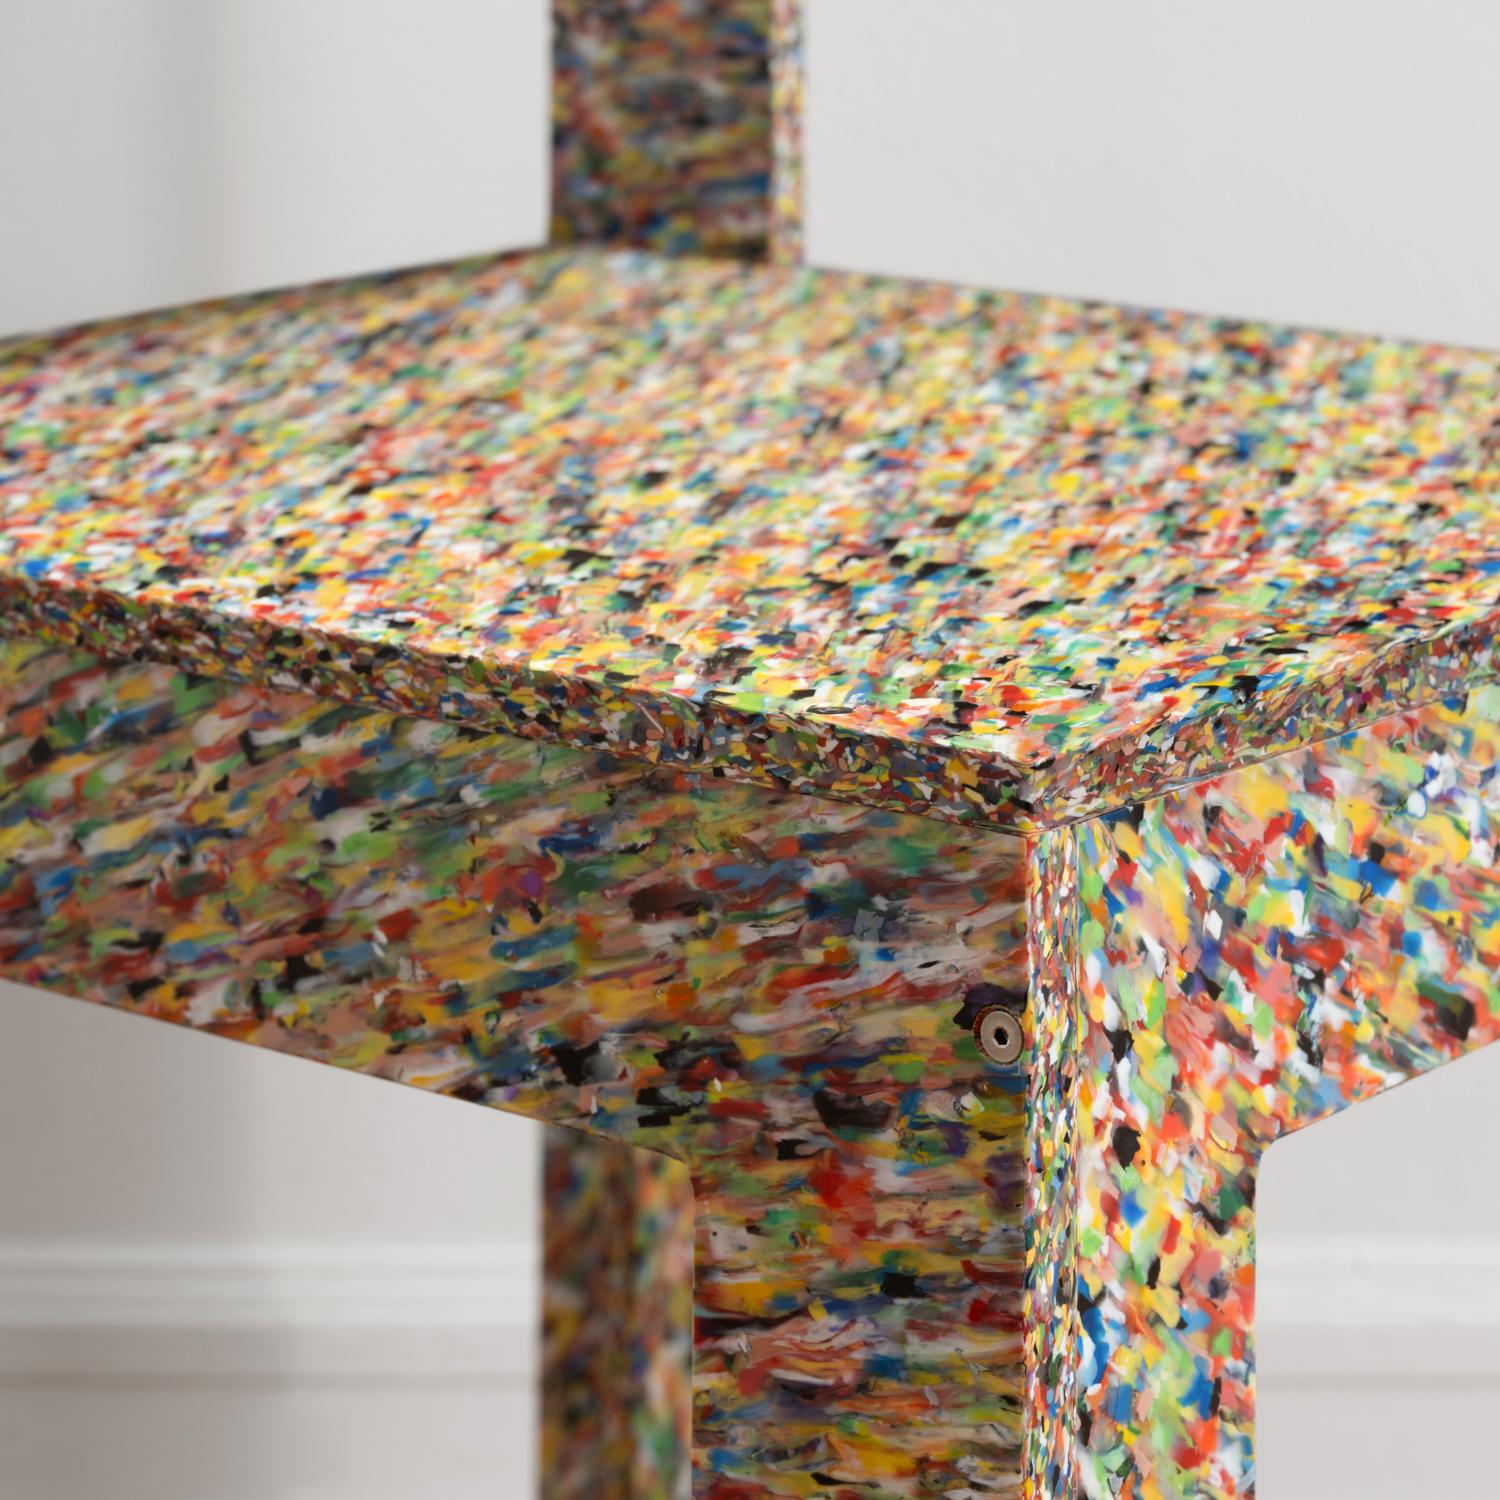 British Recycled-Plastic 'RCP2 Chair' in Confetti by Jane Atfield For Sale